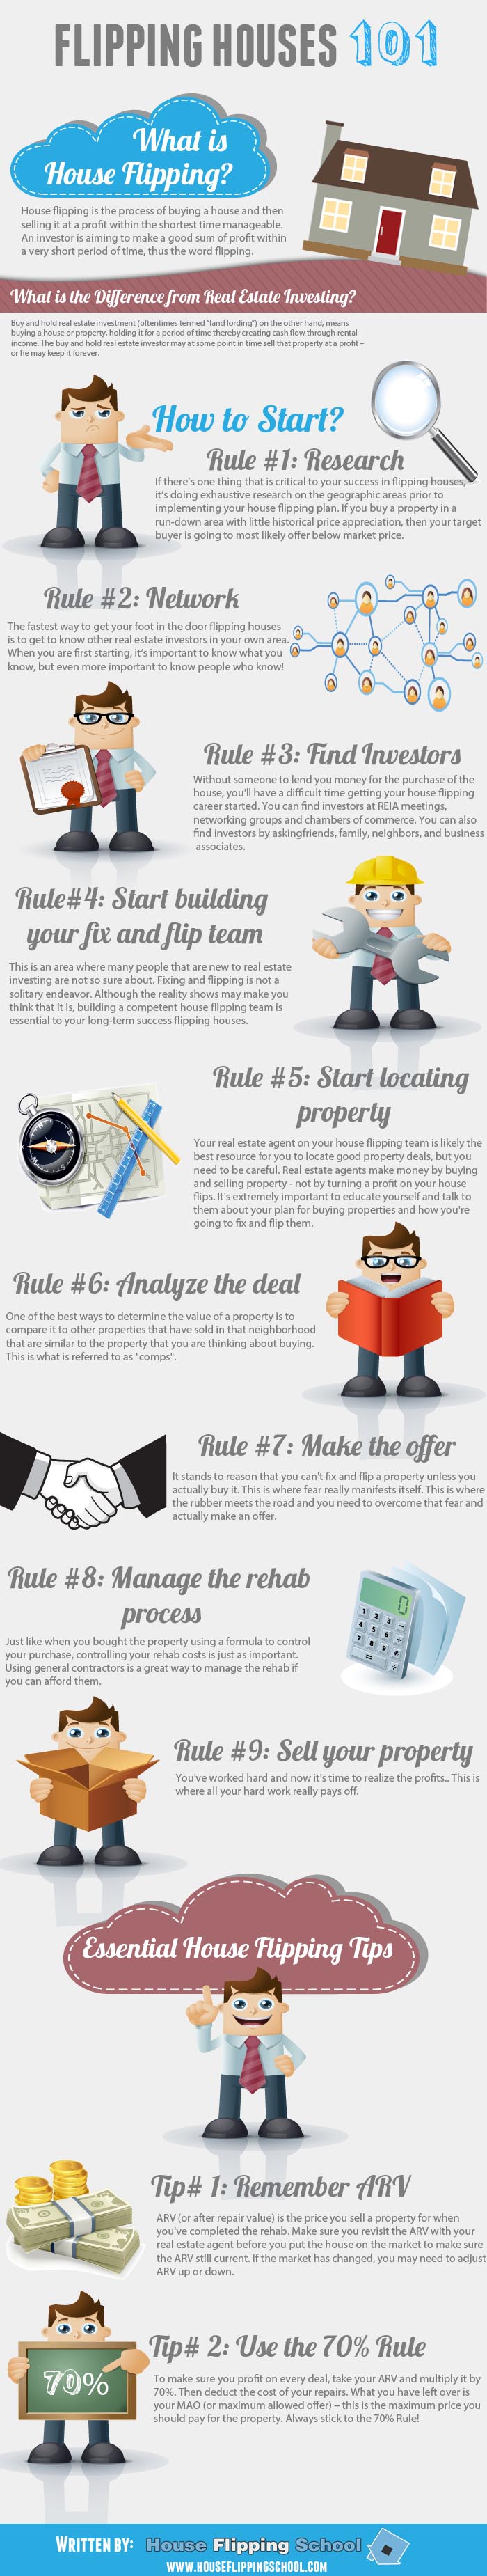 House Flipping 101 - 9 Easy Steps Infographic